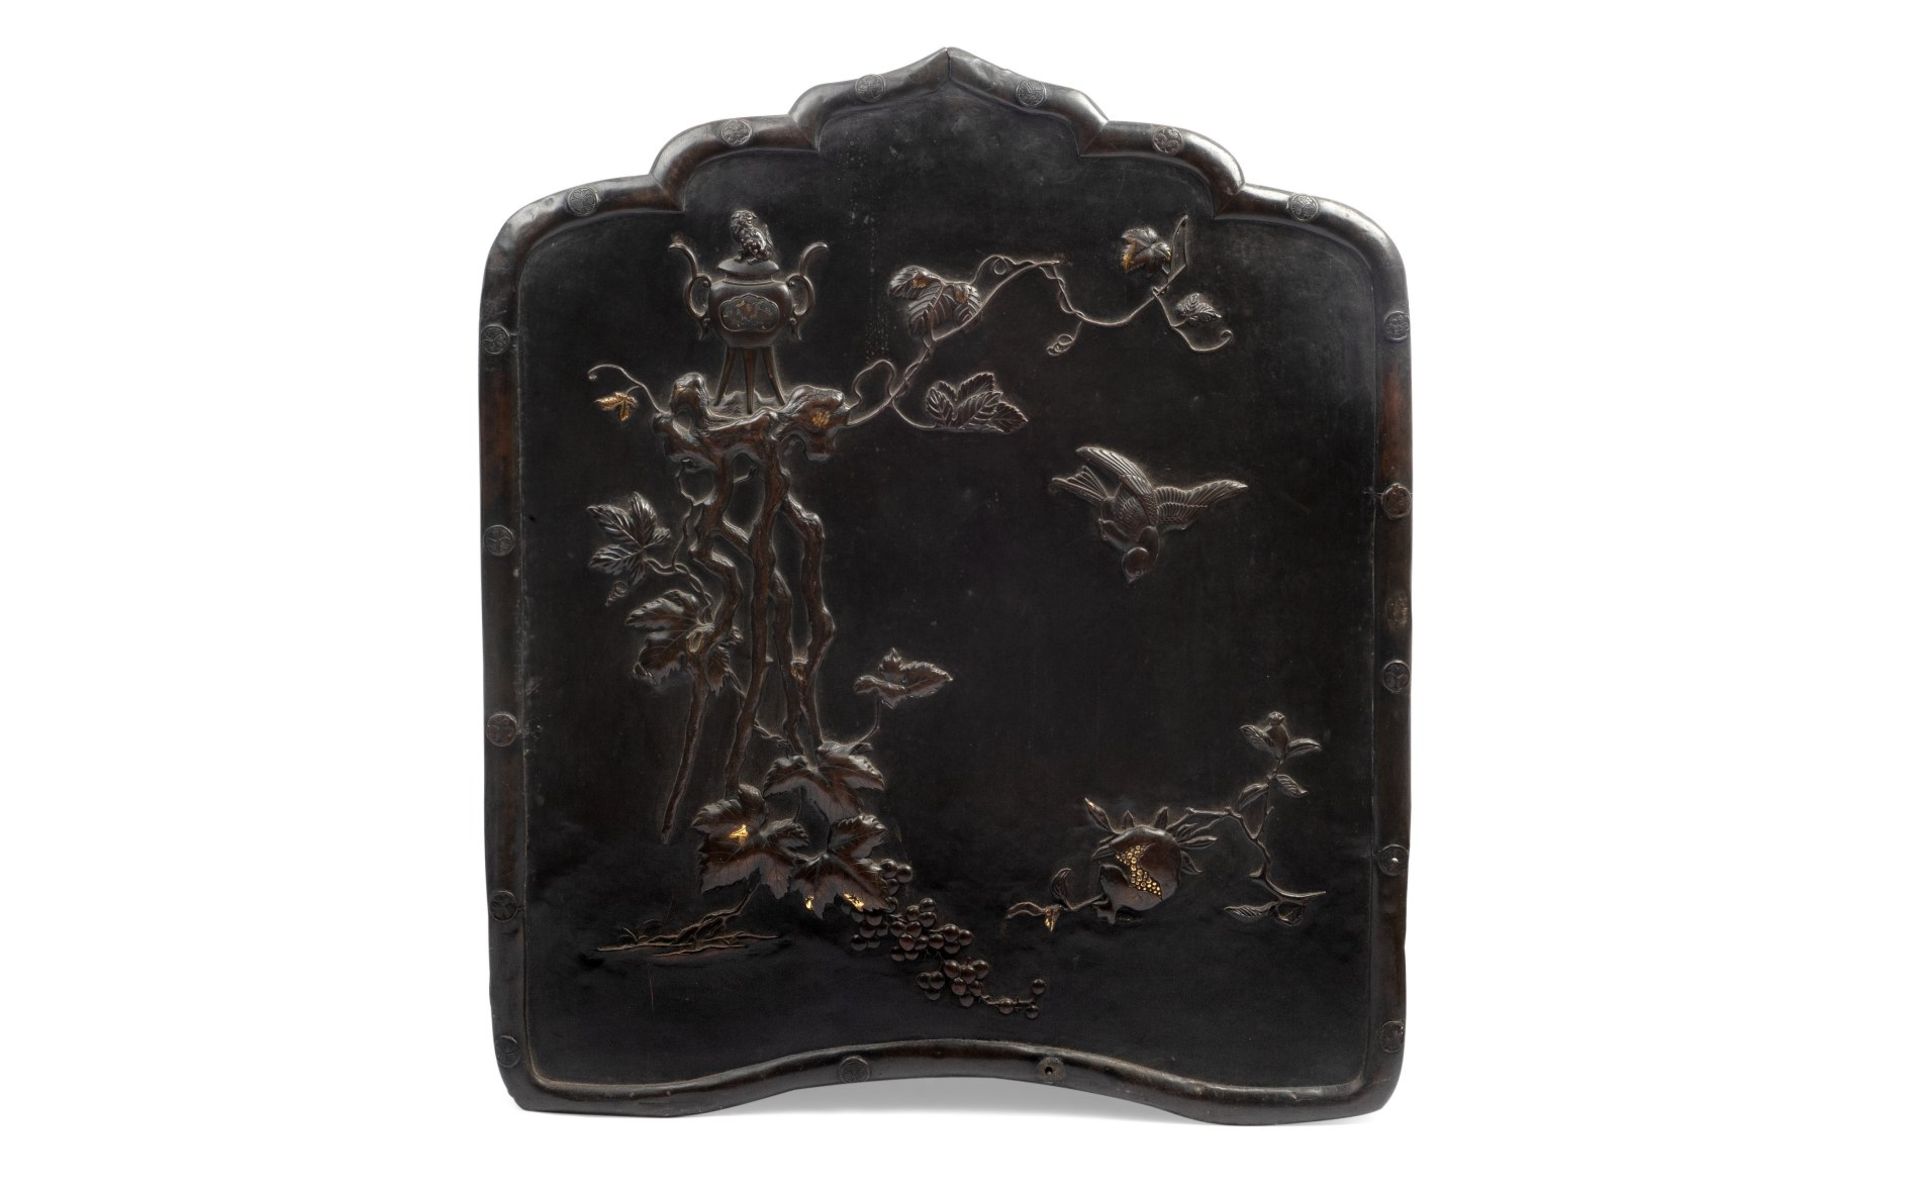 A JAPANESE PATINATED BRONZE AND PARCEL GILT PANEL, PROBABLY LATE MEIJI PERIOD PANEL (1868-1912)